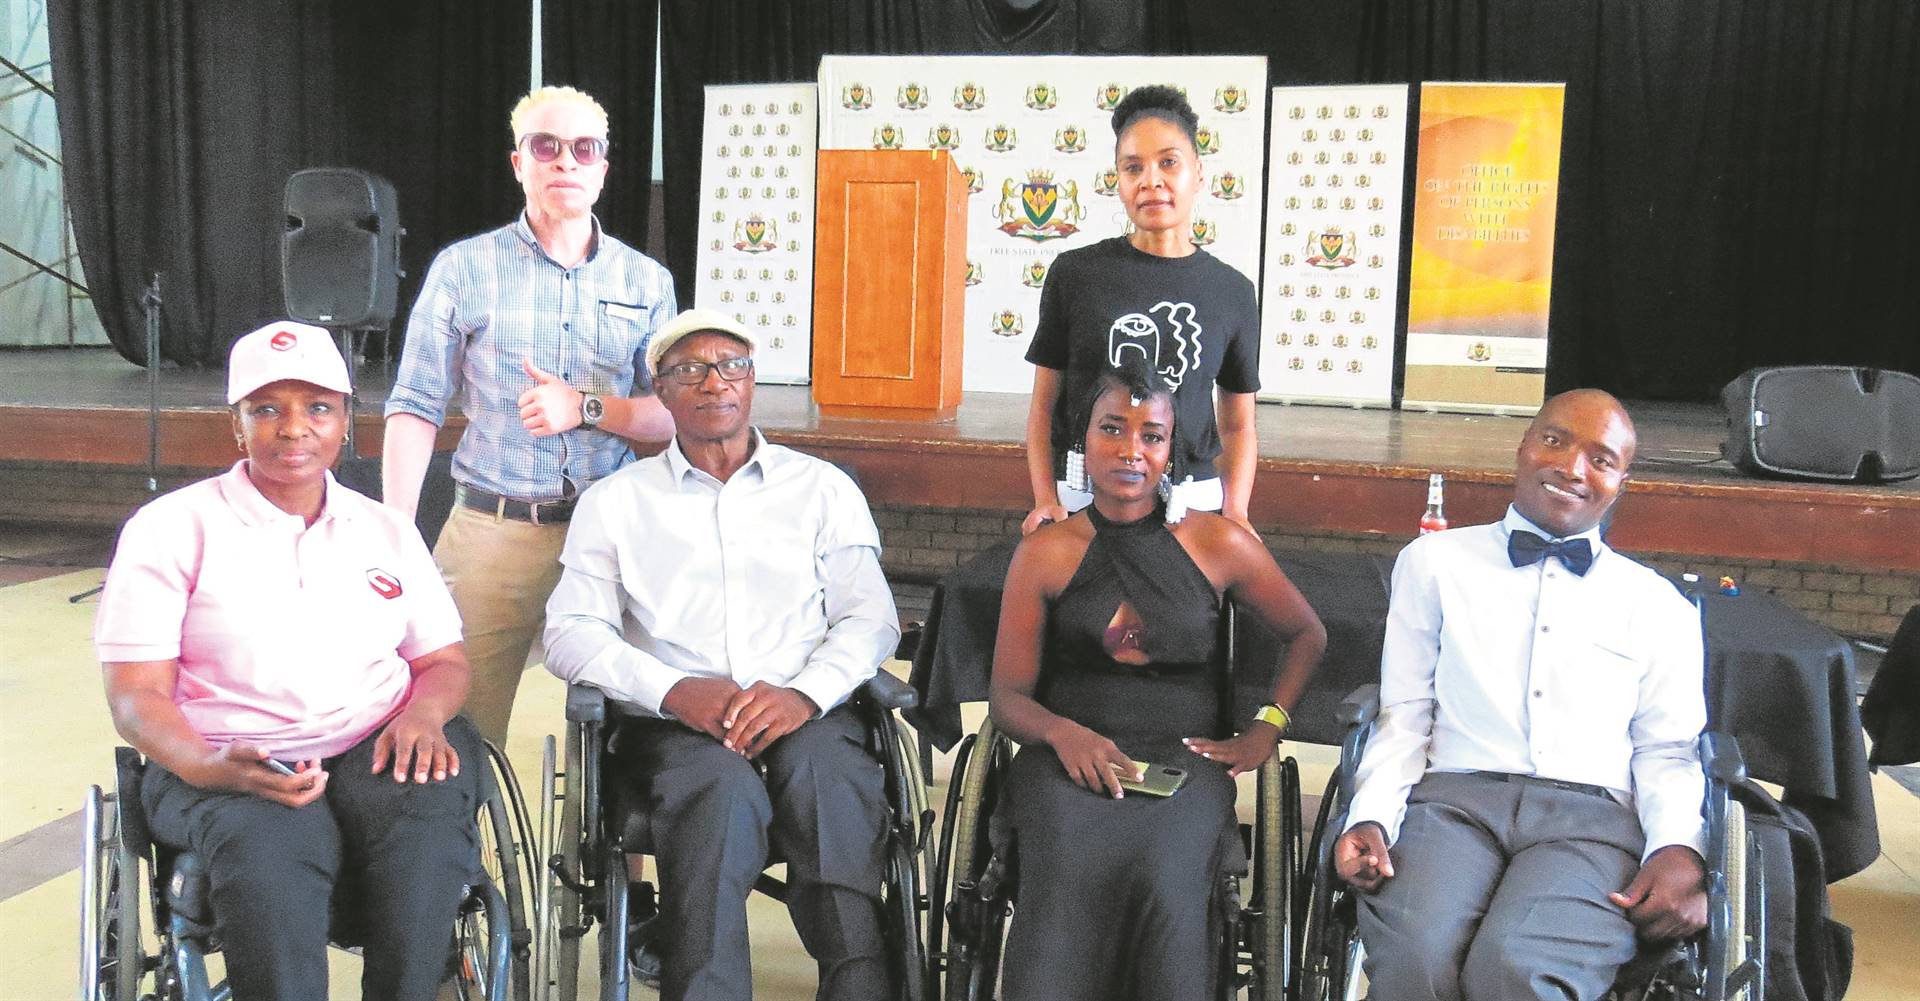 Representatives of stakeholders campaigning for the rights of the disabled at an awareness event for residents in Heidedal at the Norman Doubell Hall on 23 February are from the left, front: Ntsoaki Keiso (Disabled People of South Africa), Ernest Nyembe (Disabled People of South Africa), Zennat Glad (events coordinator) and Lebogang Monyane (assistant director on the rights of persons with disabilities); back: Puseletso Kopa (The Society for the Blind in the Free State) and Venesa Leeuw (The Miss Lesh Foundation). Photo: Teboho Setena